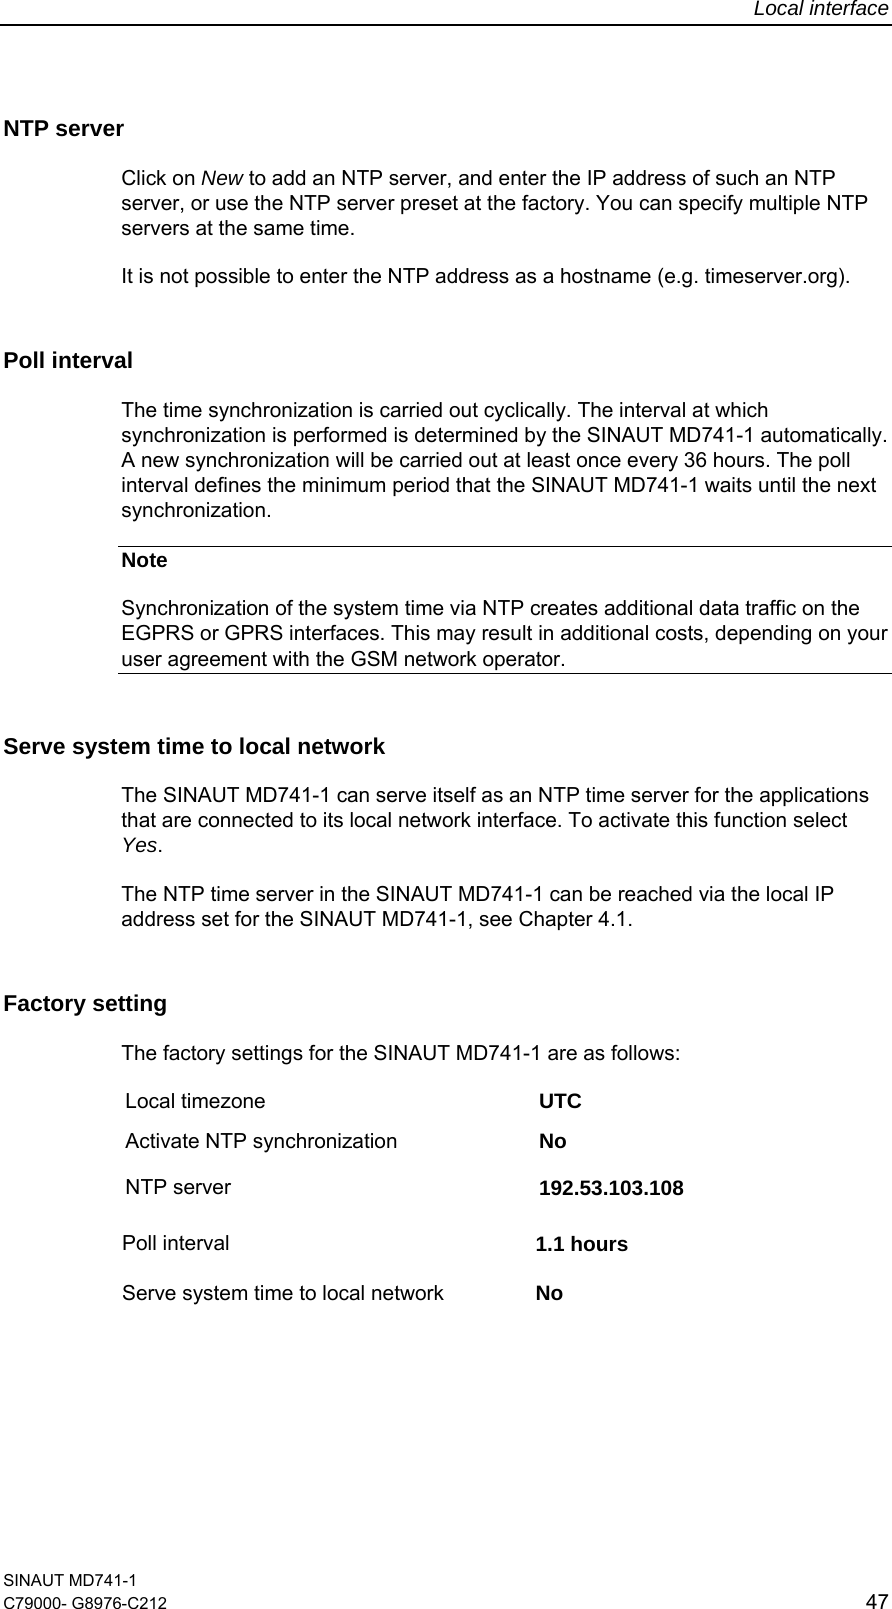 Local interface SINAUT MD741-1 C79000- G8976-C212  47  NTP server Click on New to add an NTP server, and enter the IP address of such an NTP server, or use the NTP server preset at the factory. You can specify multiple NTP servers at the same time. It is not possible to enter the NTP address as a hostname (e.g. timeserver.org). Poll interval The time synchronization is carried out cyclically. The interval at which synchronization is performed is determined by the SINAUT MD741-1 automatically. A new synchronization will be carried out at least once every 36 hours. The poll interval defines the minimum period that the SINAUT MD741-1 waits until the next synchronization. Note Synchronization of the system time via NTP creates additional data traffic on the EGPRS or GPRS interfaces. This may result in additional costs, depending on your user agreement with the GSM network operator. Serve system time to local network  The SINAUT MD741-1 can serve itself as an NTP time server for the applications that are connected to its local network interface. To activate this function select Yes. The NTP time server in the SINAUT MD741-1 can be reached via the local IP address set for the SINAUT MD741-1, see Chapter 4.1. Factory setting  The factory settings for the SINAUT MD741-1 are as follows: Local timezone  UTC Activate NTP synchronization  No NTP server  192.53.103.108 Poll interval  1.1 hours  Serve system time to local network  No   